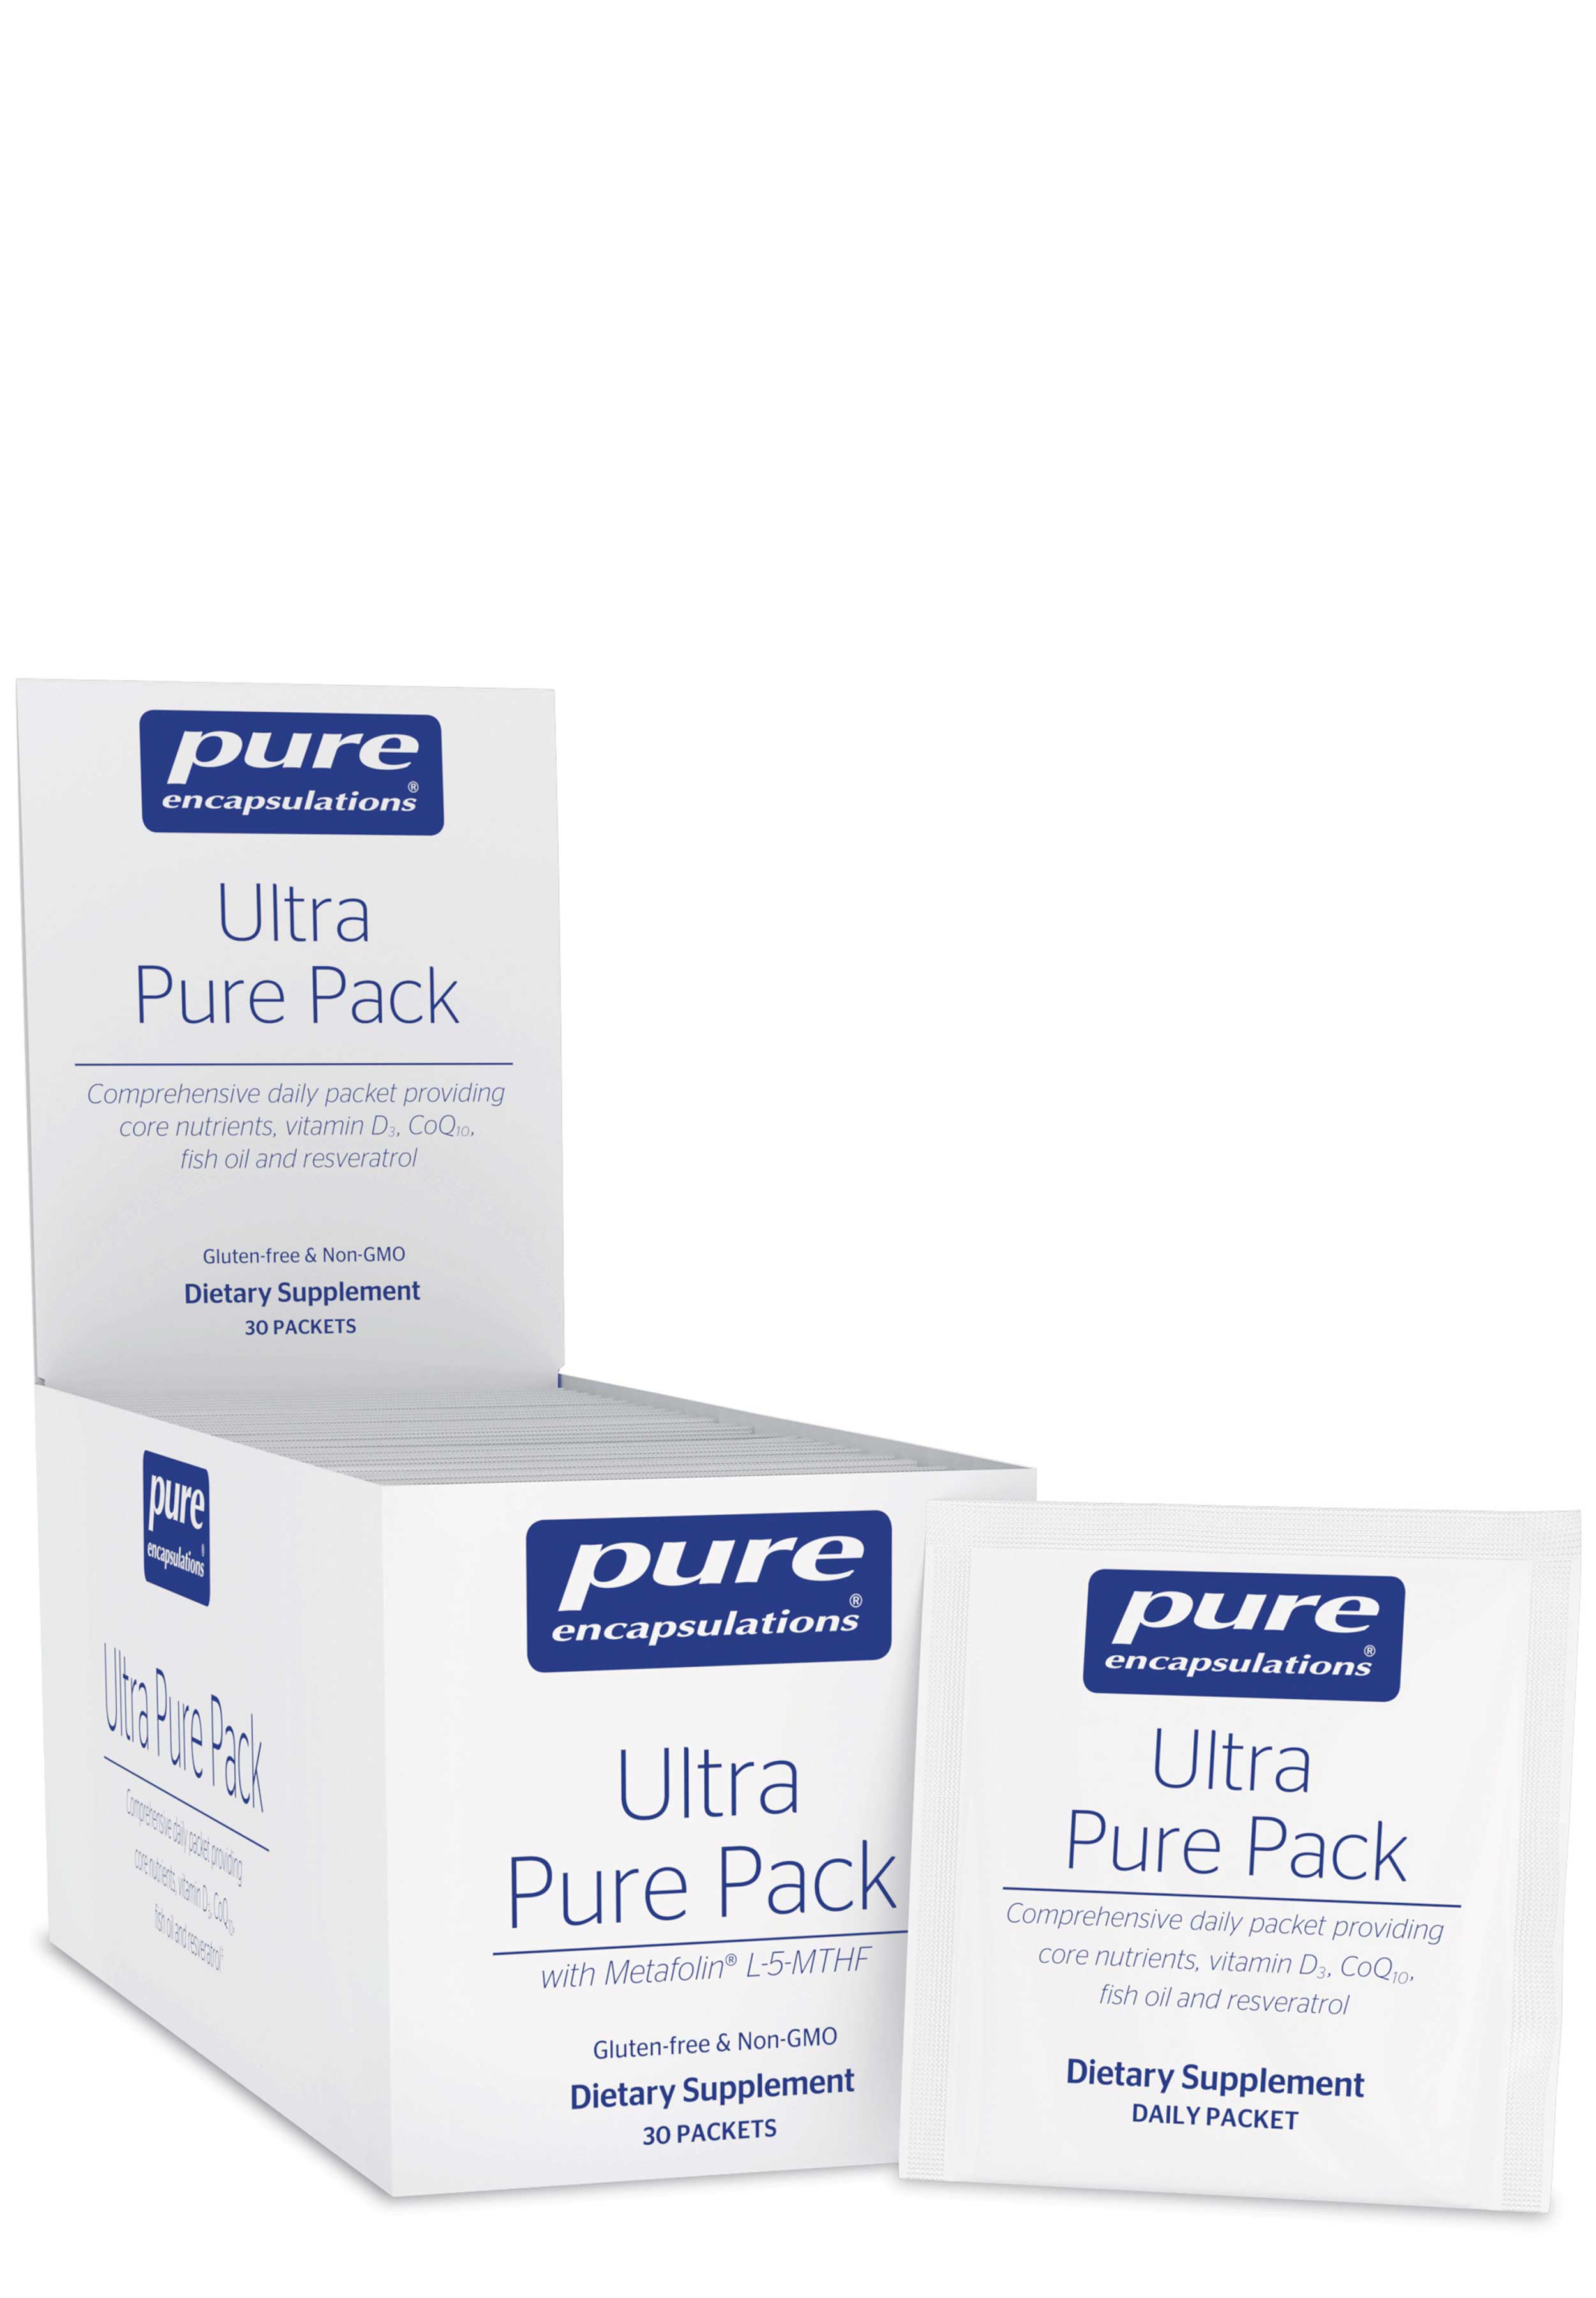 Pure Encapsulations Ultra Pure Pack